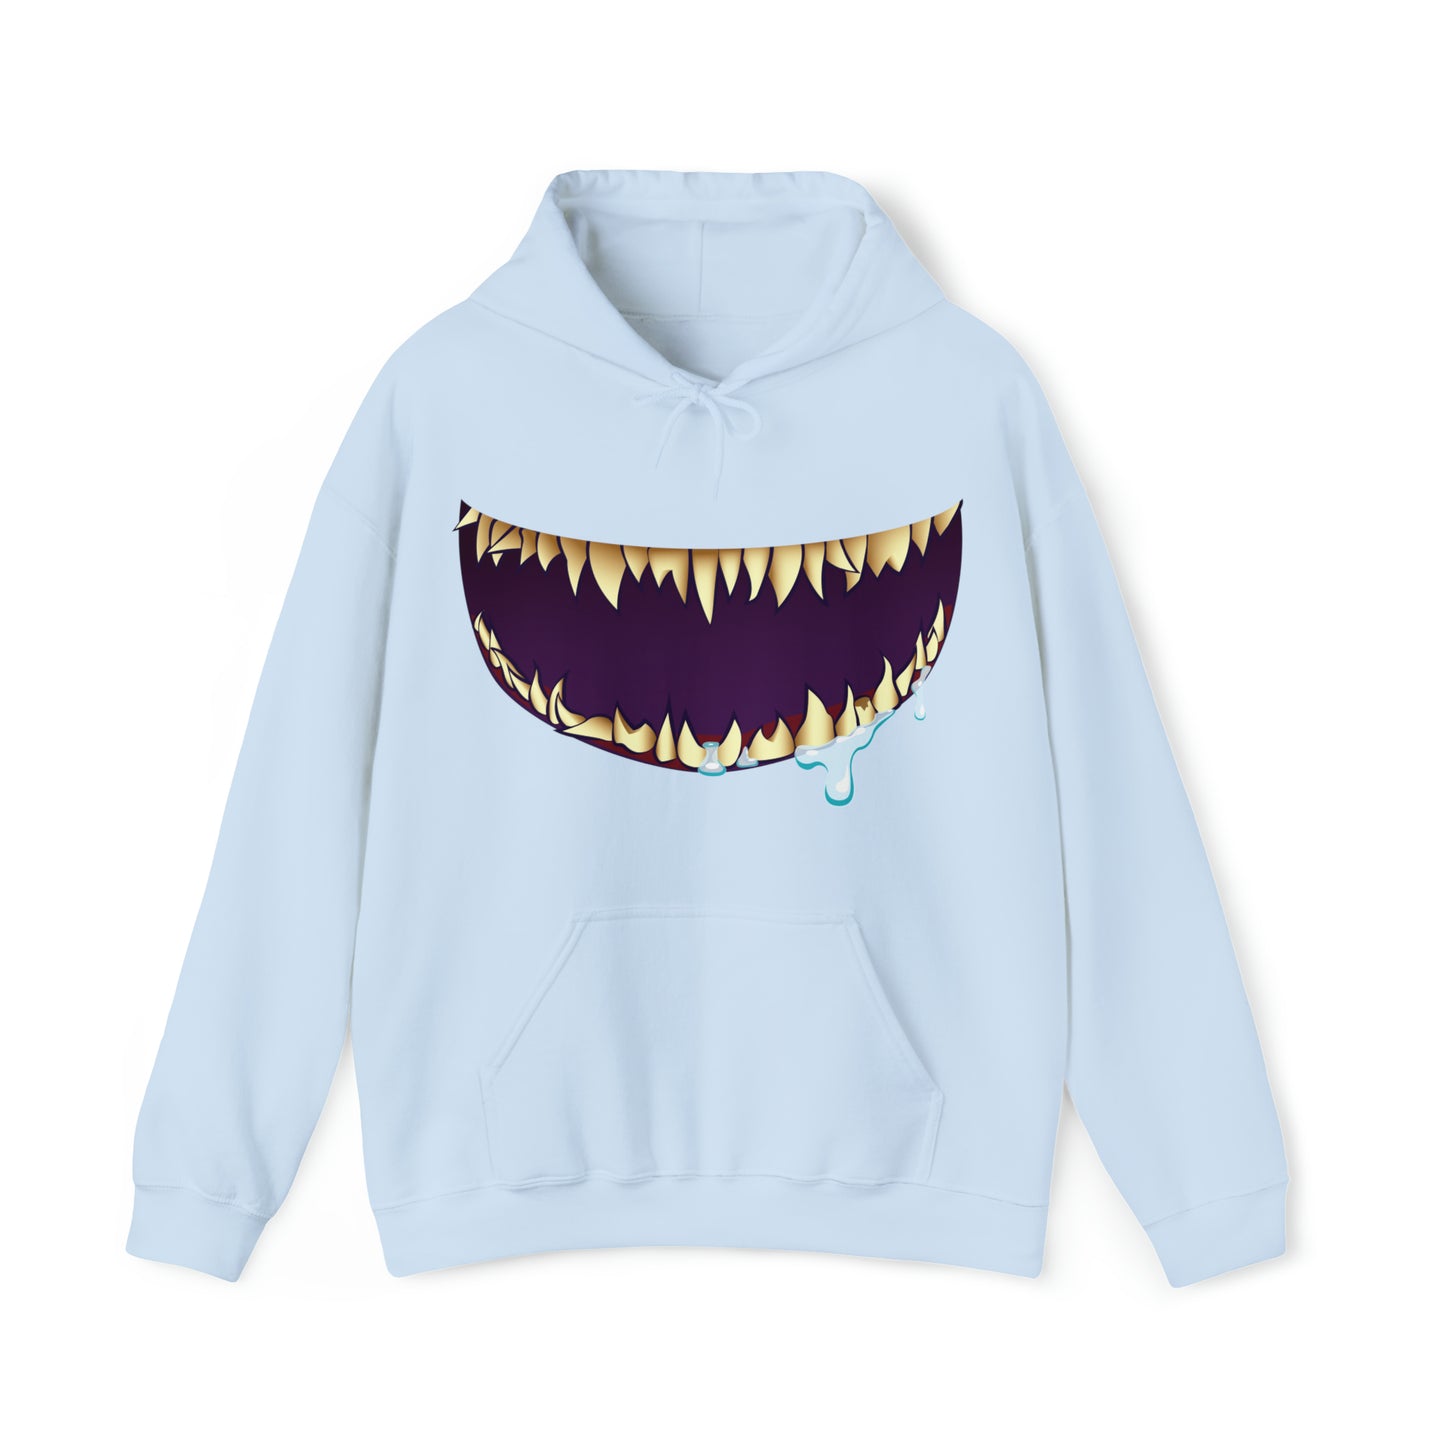 Hungry Smile Pullover